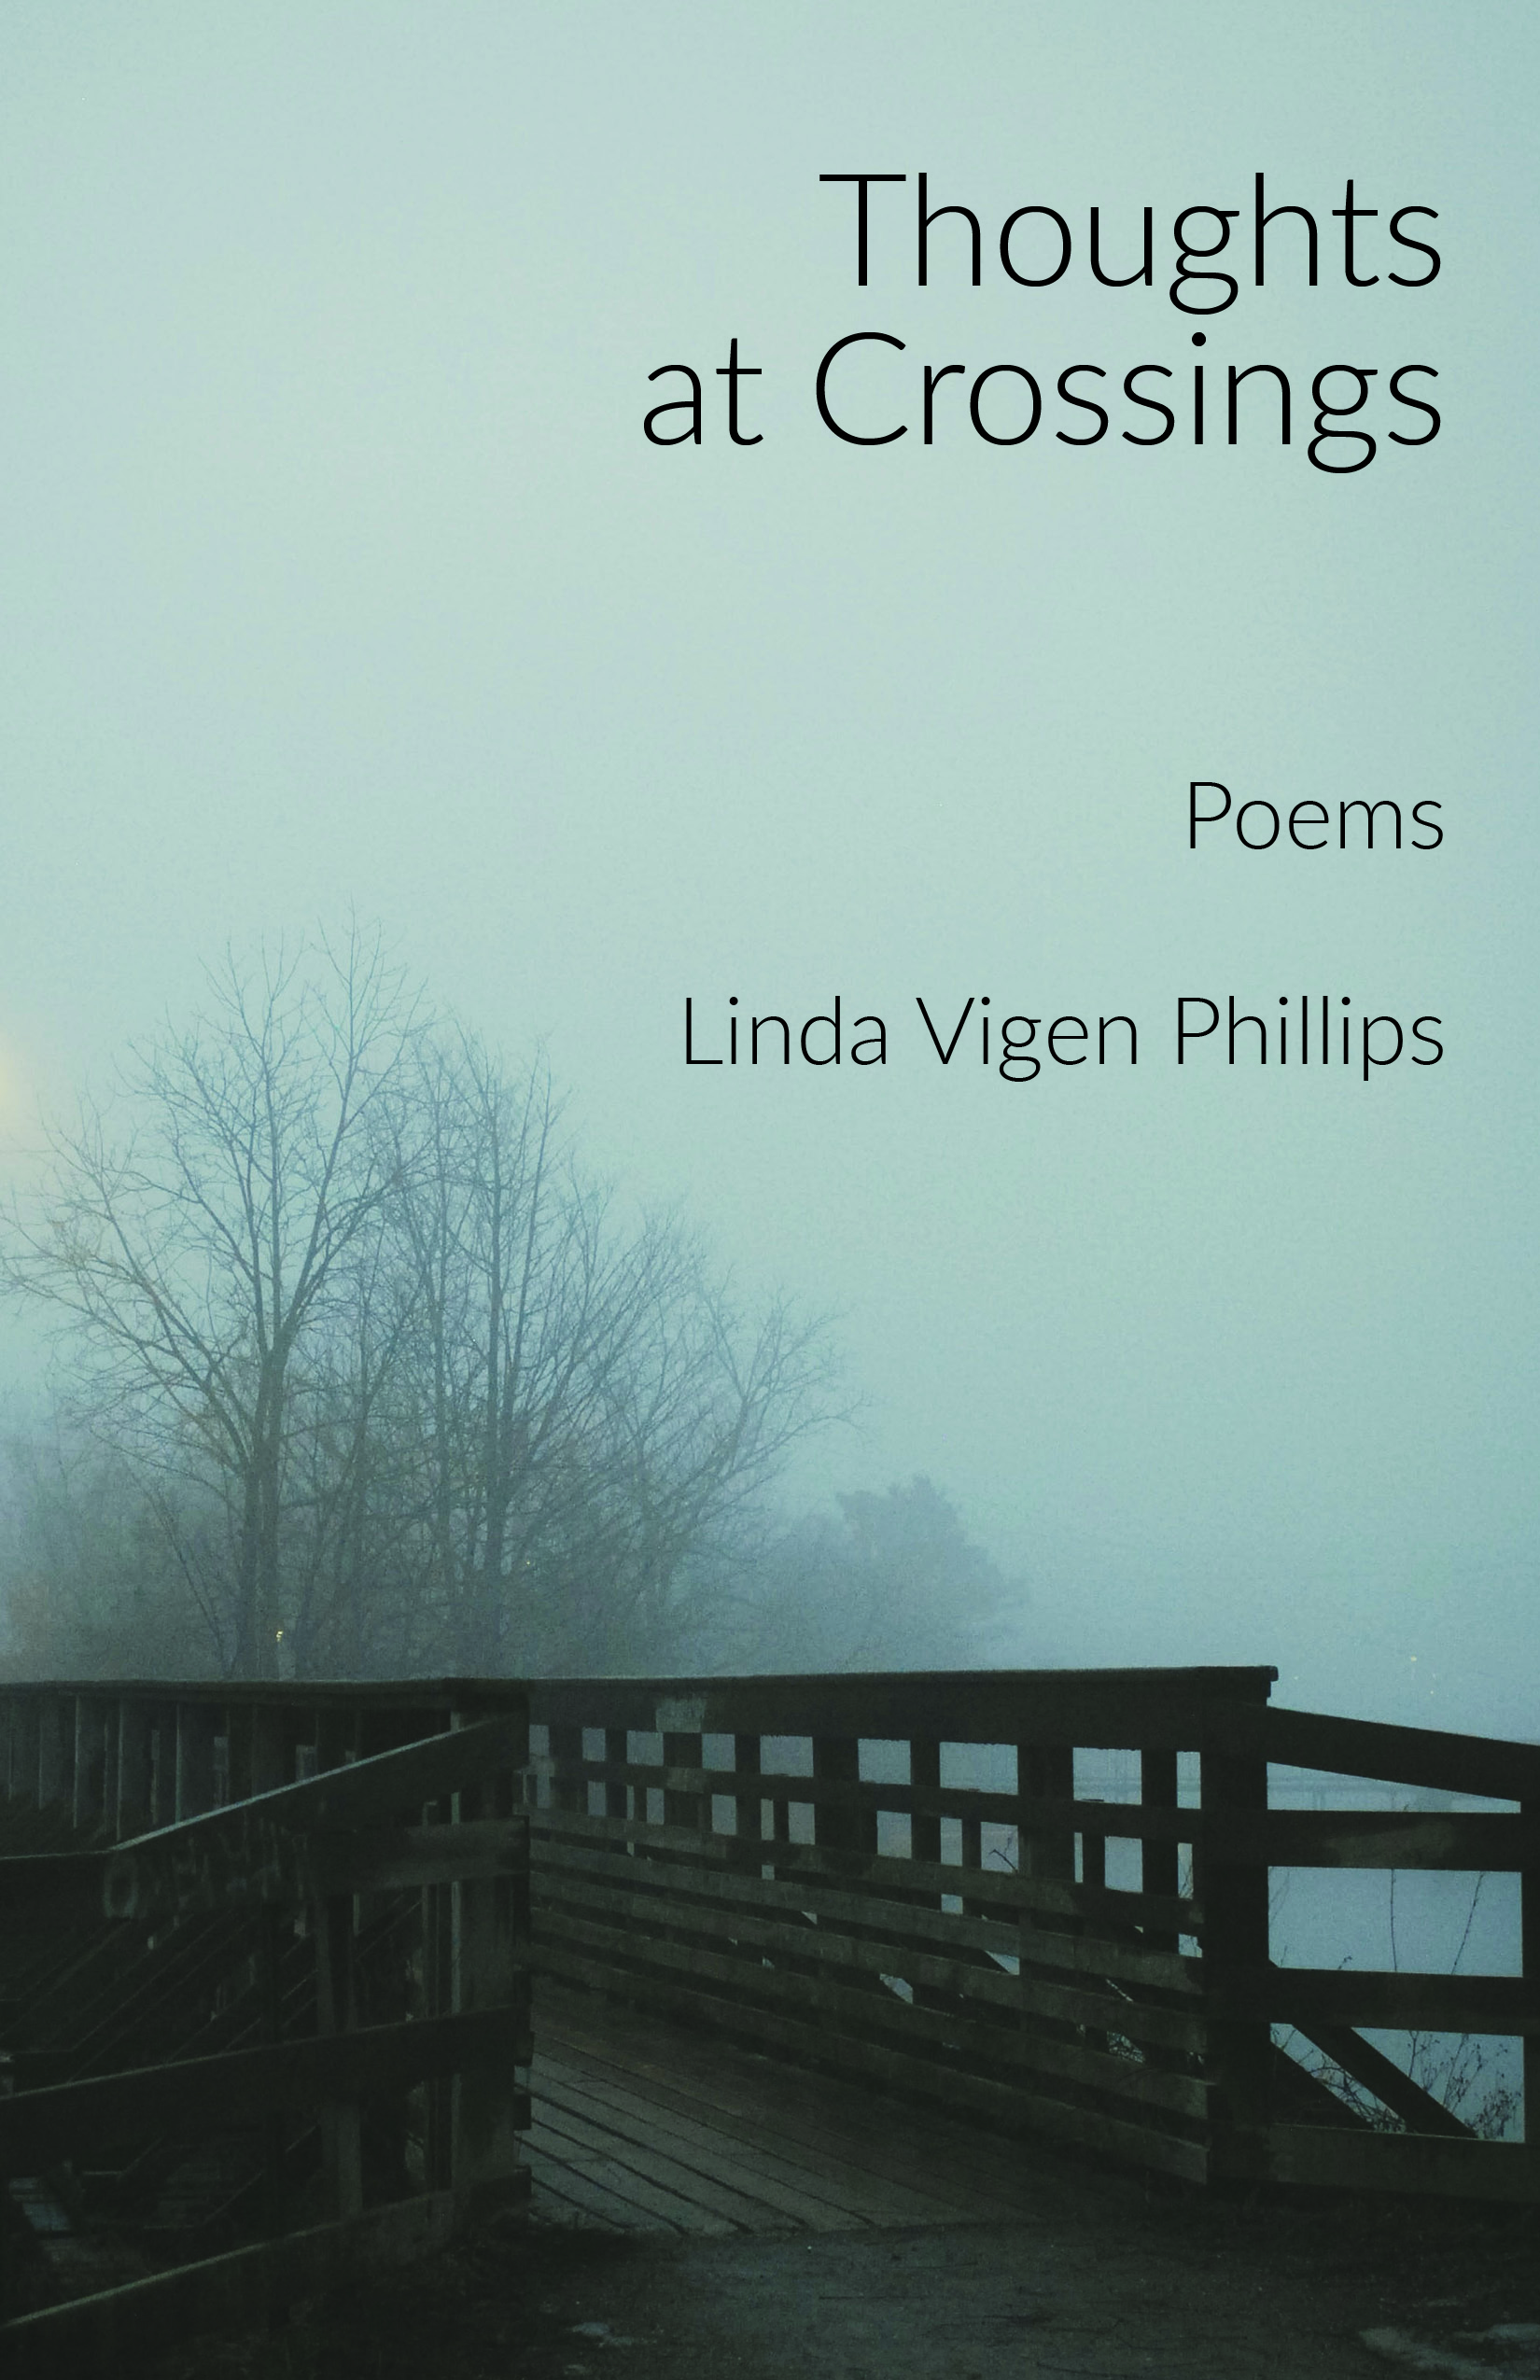 Thoughts at Crossings, by Linda Vigen Phillips